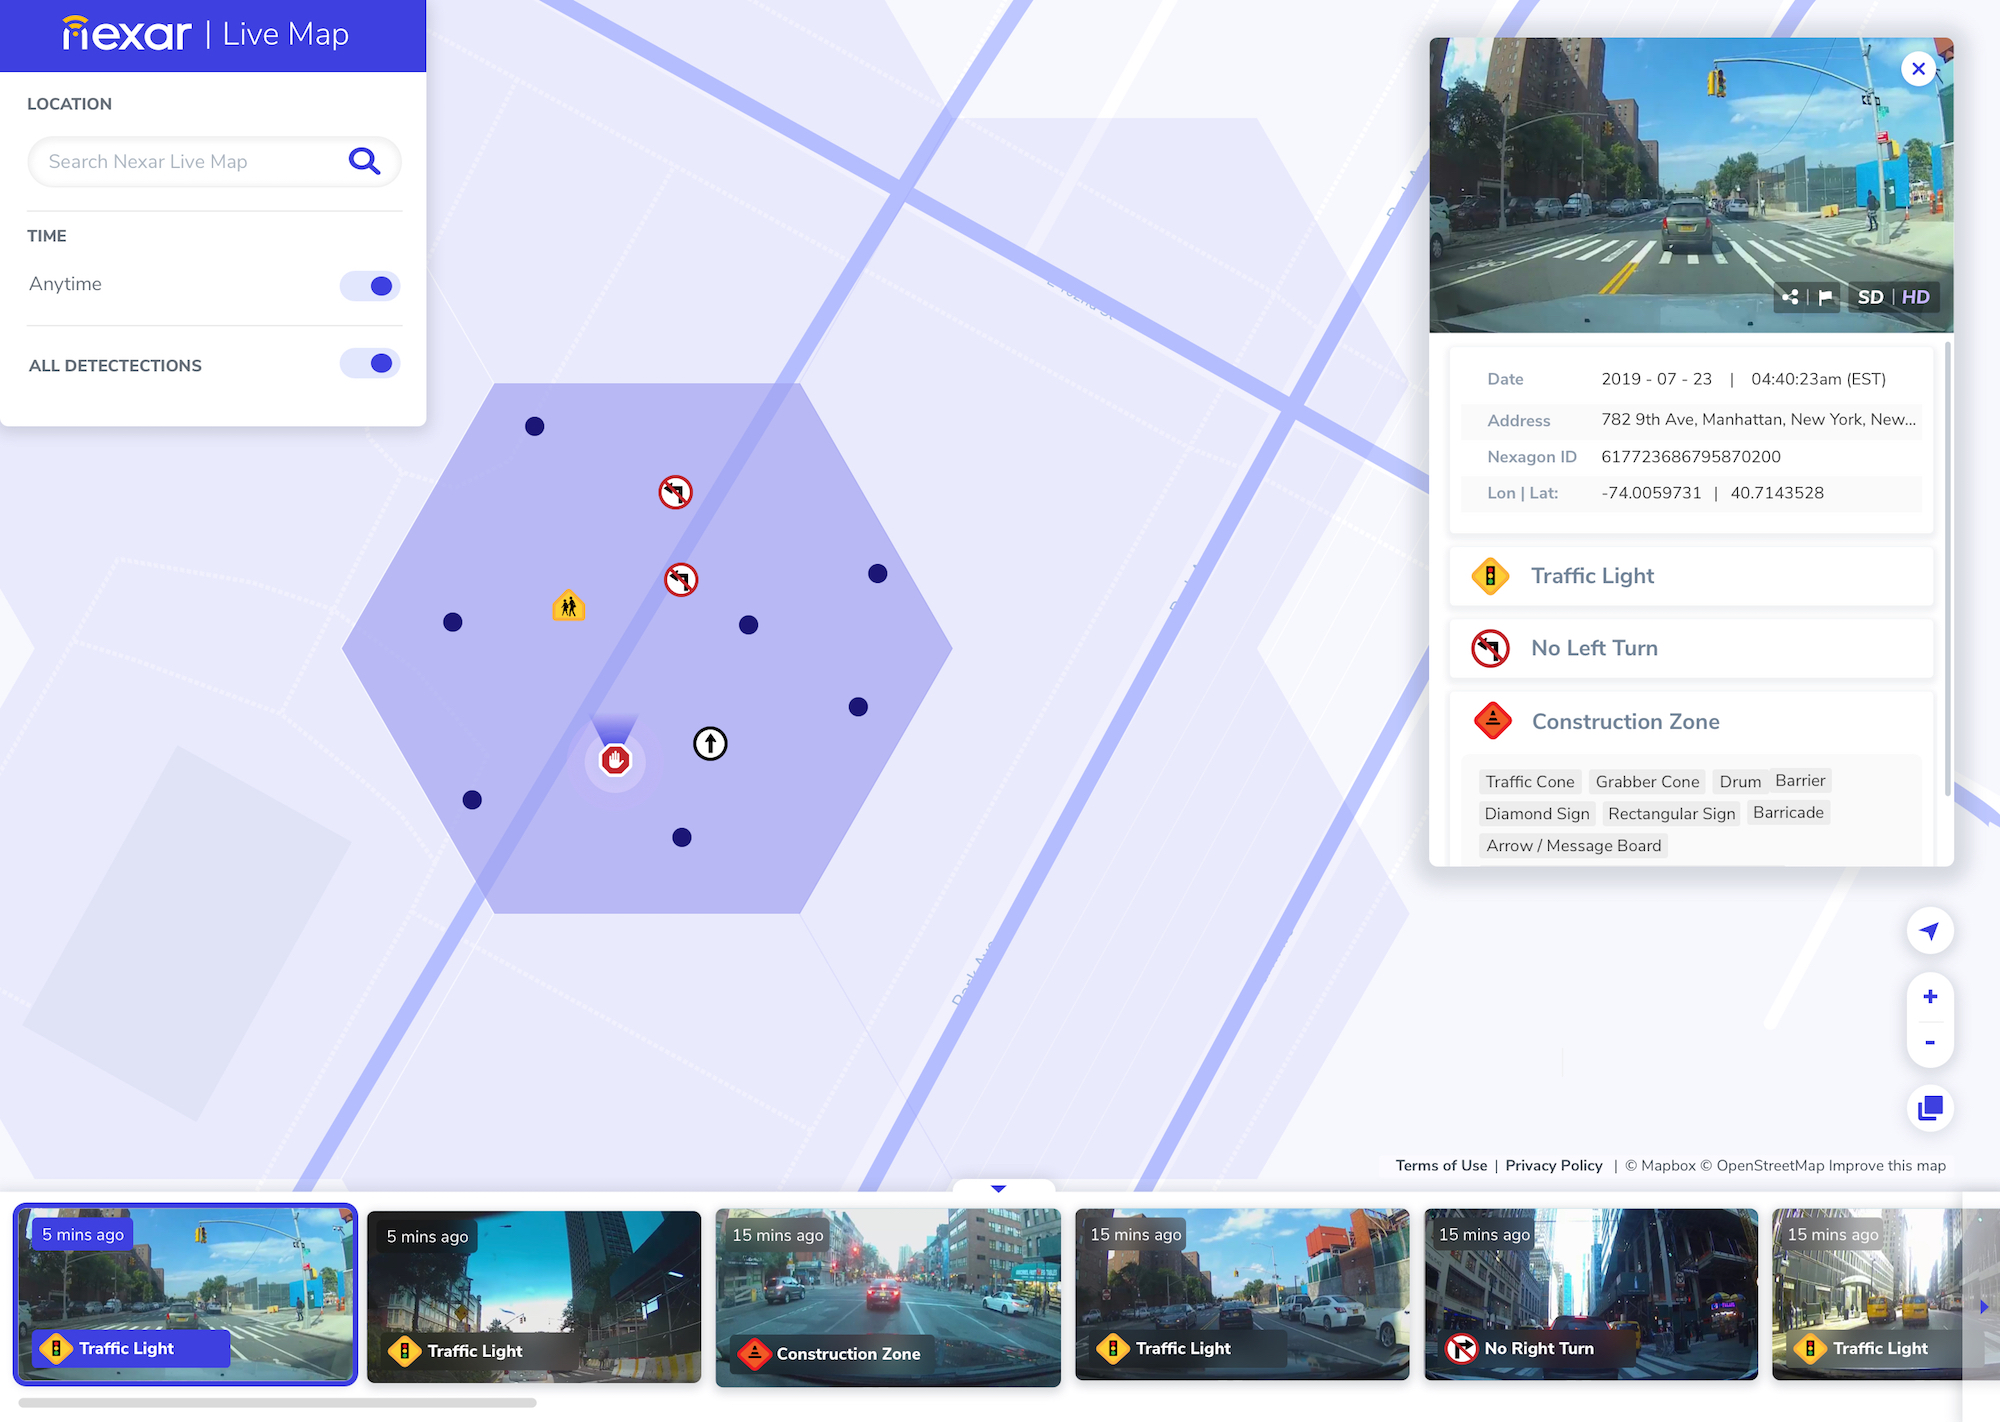 Nexar S Live Map Is Like Street View With Pictures From 5 Minutes